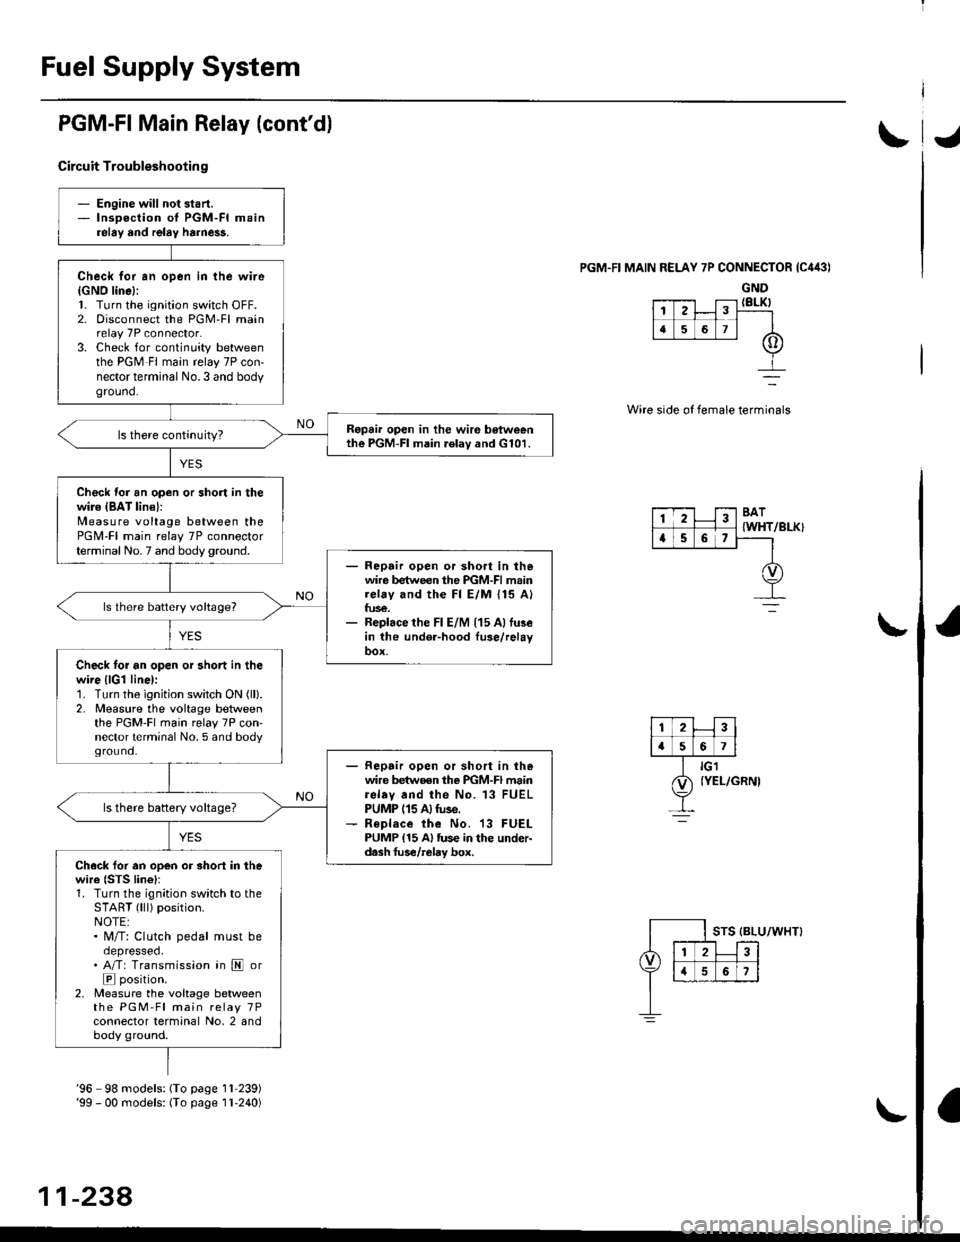 HONDA CIVIC 1996 6.G Service Manual Fuel Supply System
PGM-FI Main Relay (contdl
Circuit Troubleshootin g
PGM.FI MAIN RELAY 7P CONNECTOR {C443)
GND{8LK)
Wire side of female terminals
/BLK}
- Engine will not start.- lnsoection of PGM-FI